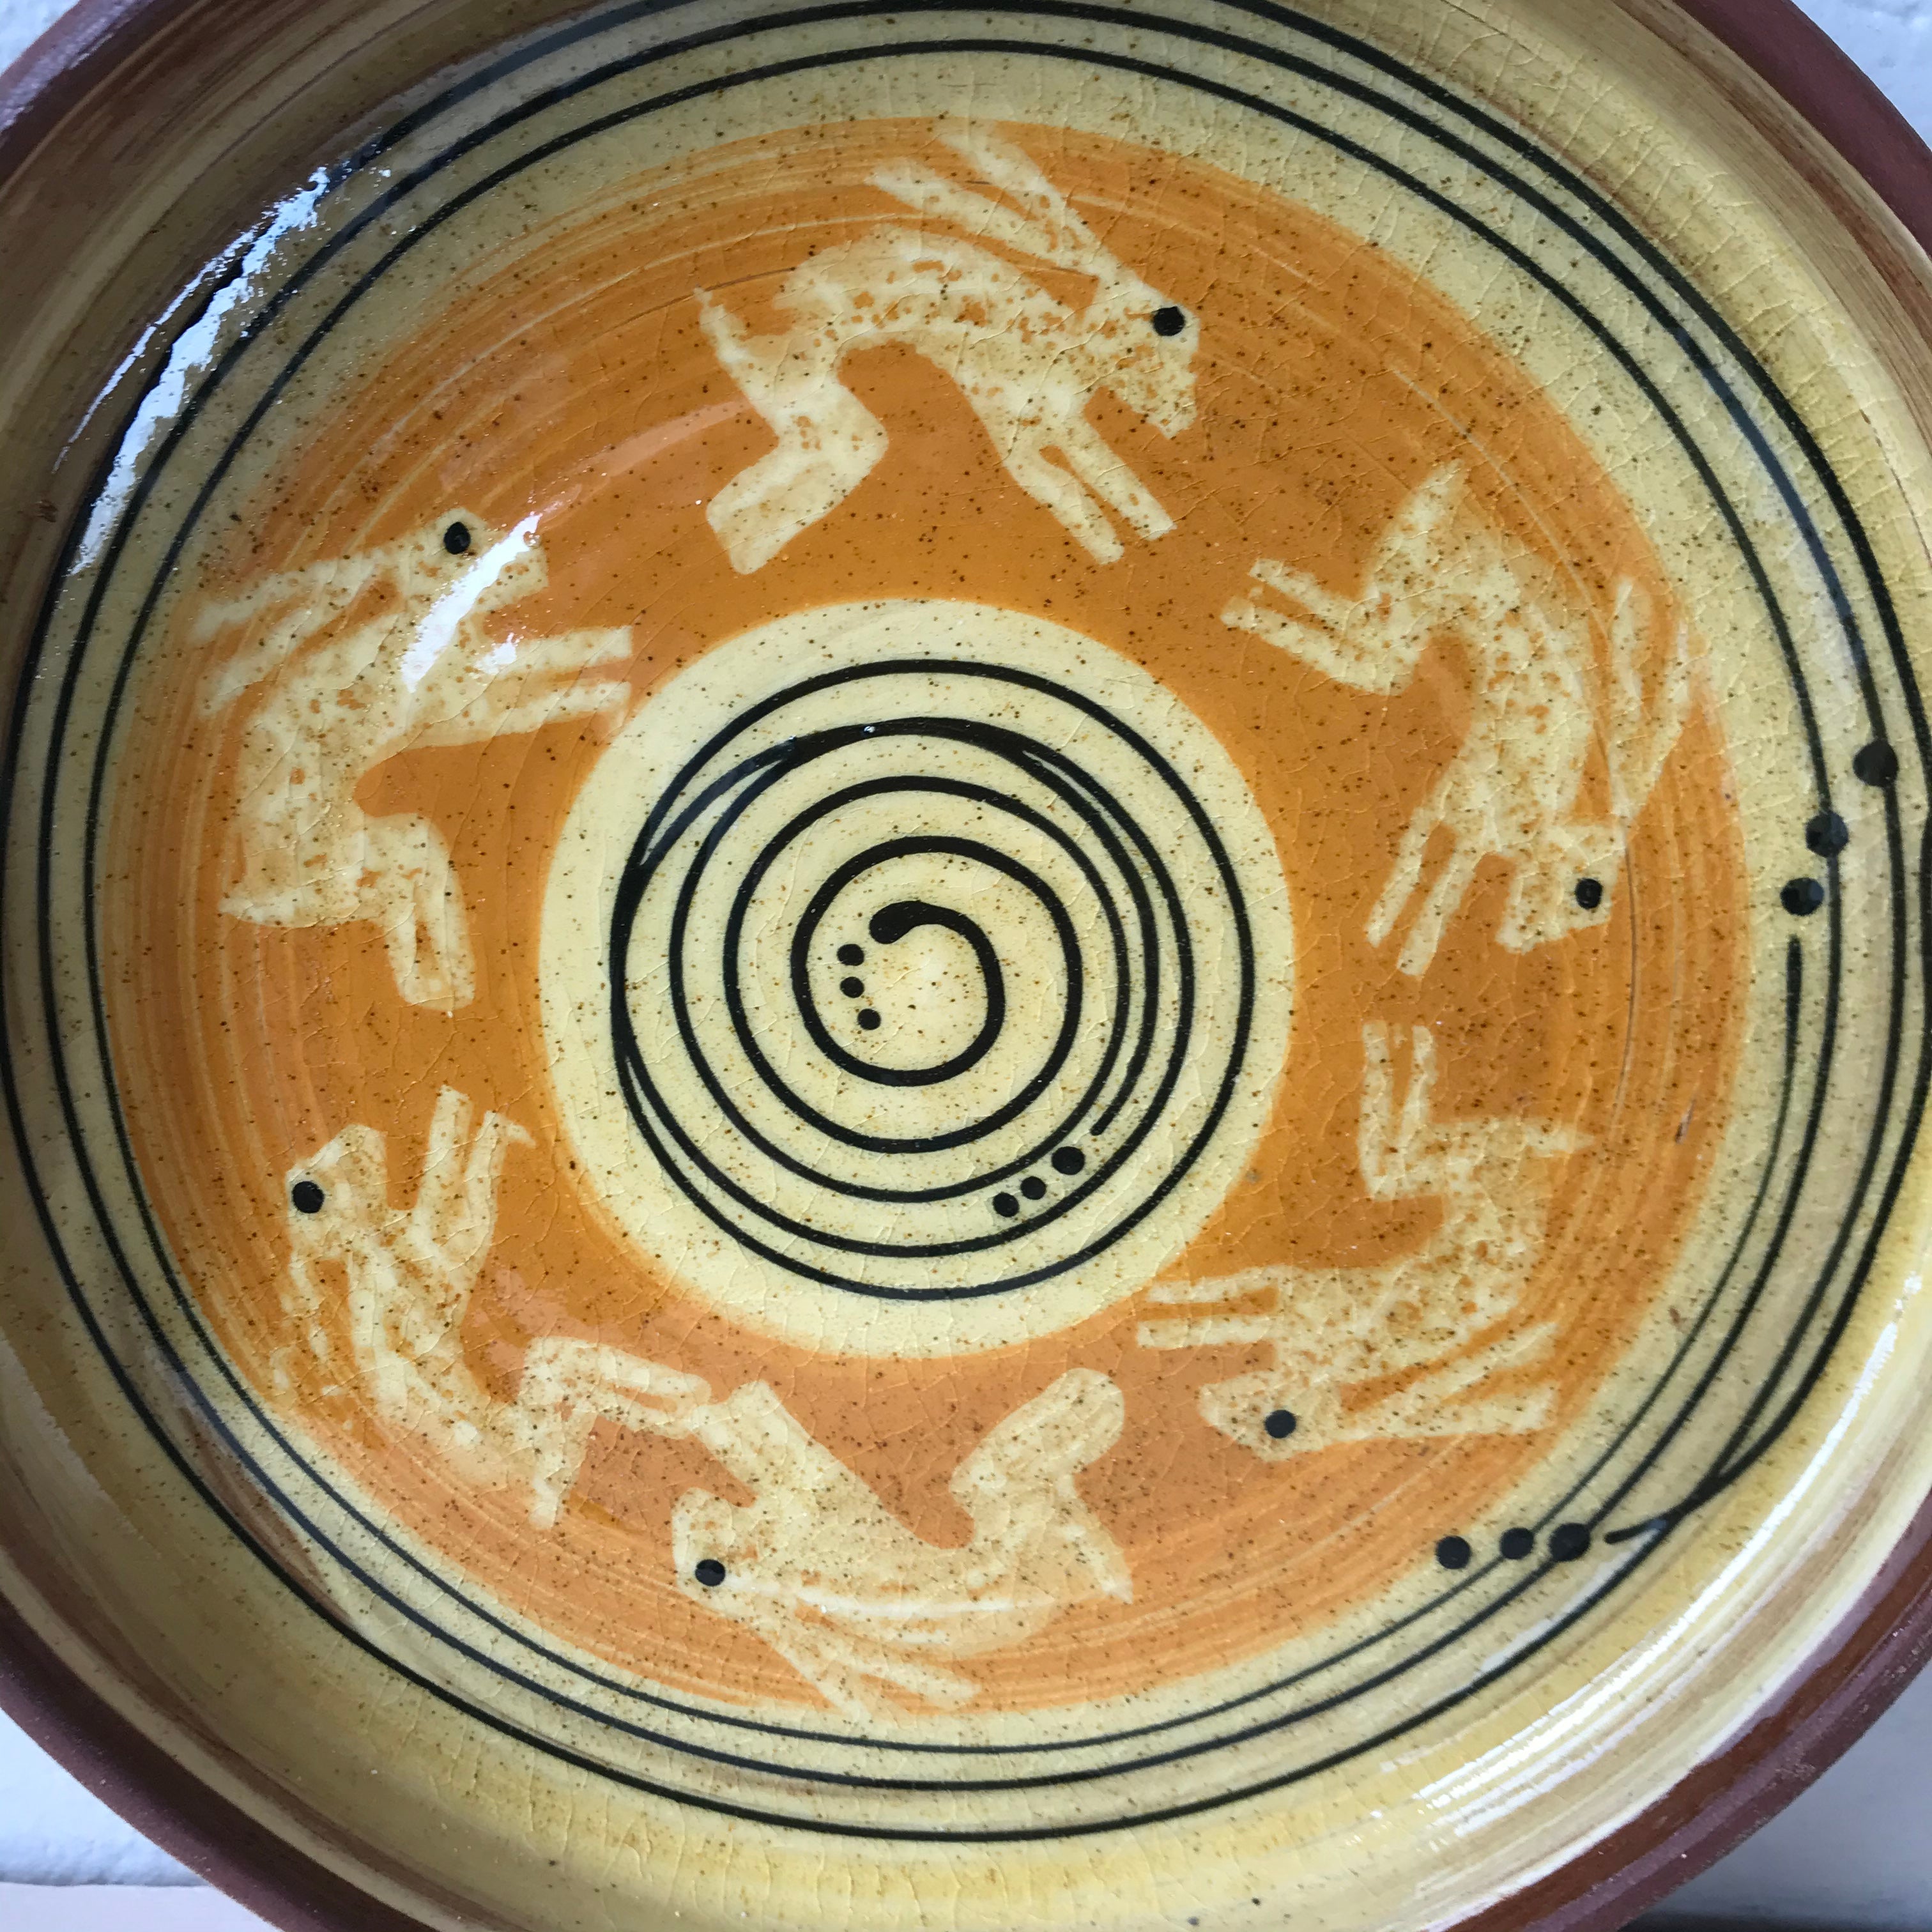 Cream and Orange Hare Plate with Handles